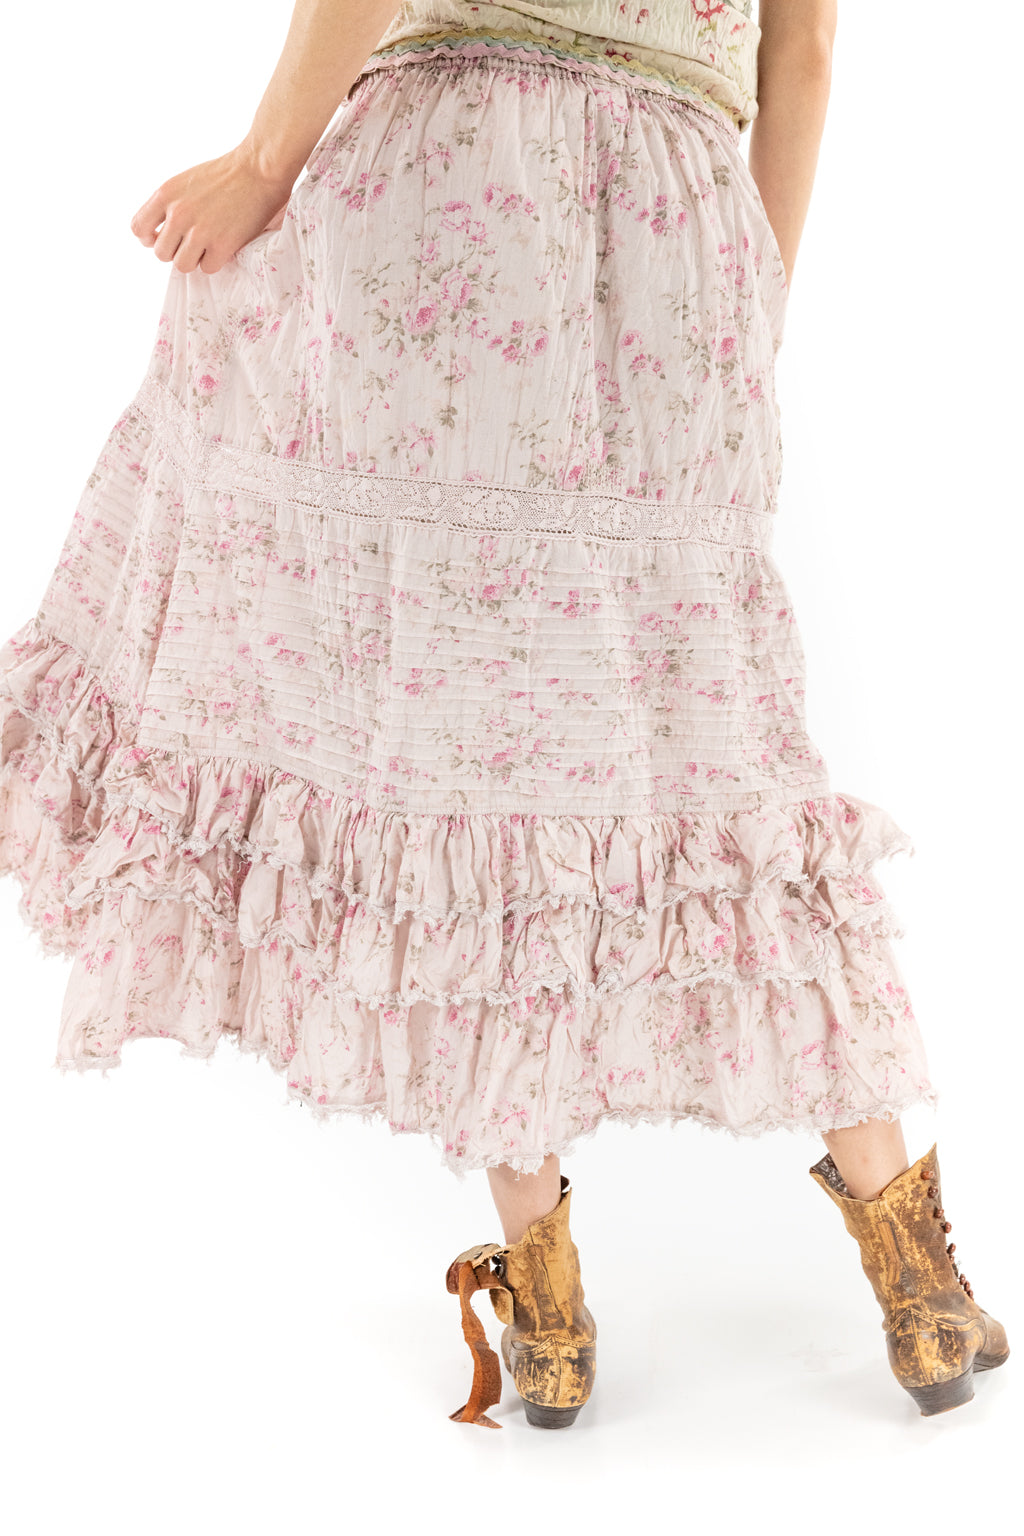 PENELOPE RUFFLE SKIRT - MOLLY - Kingfisher Road - Online Boutique